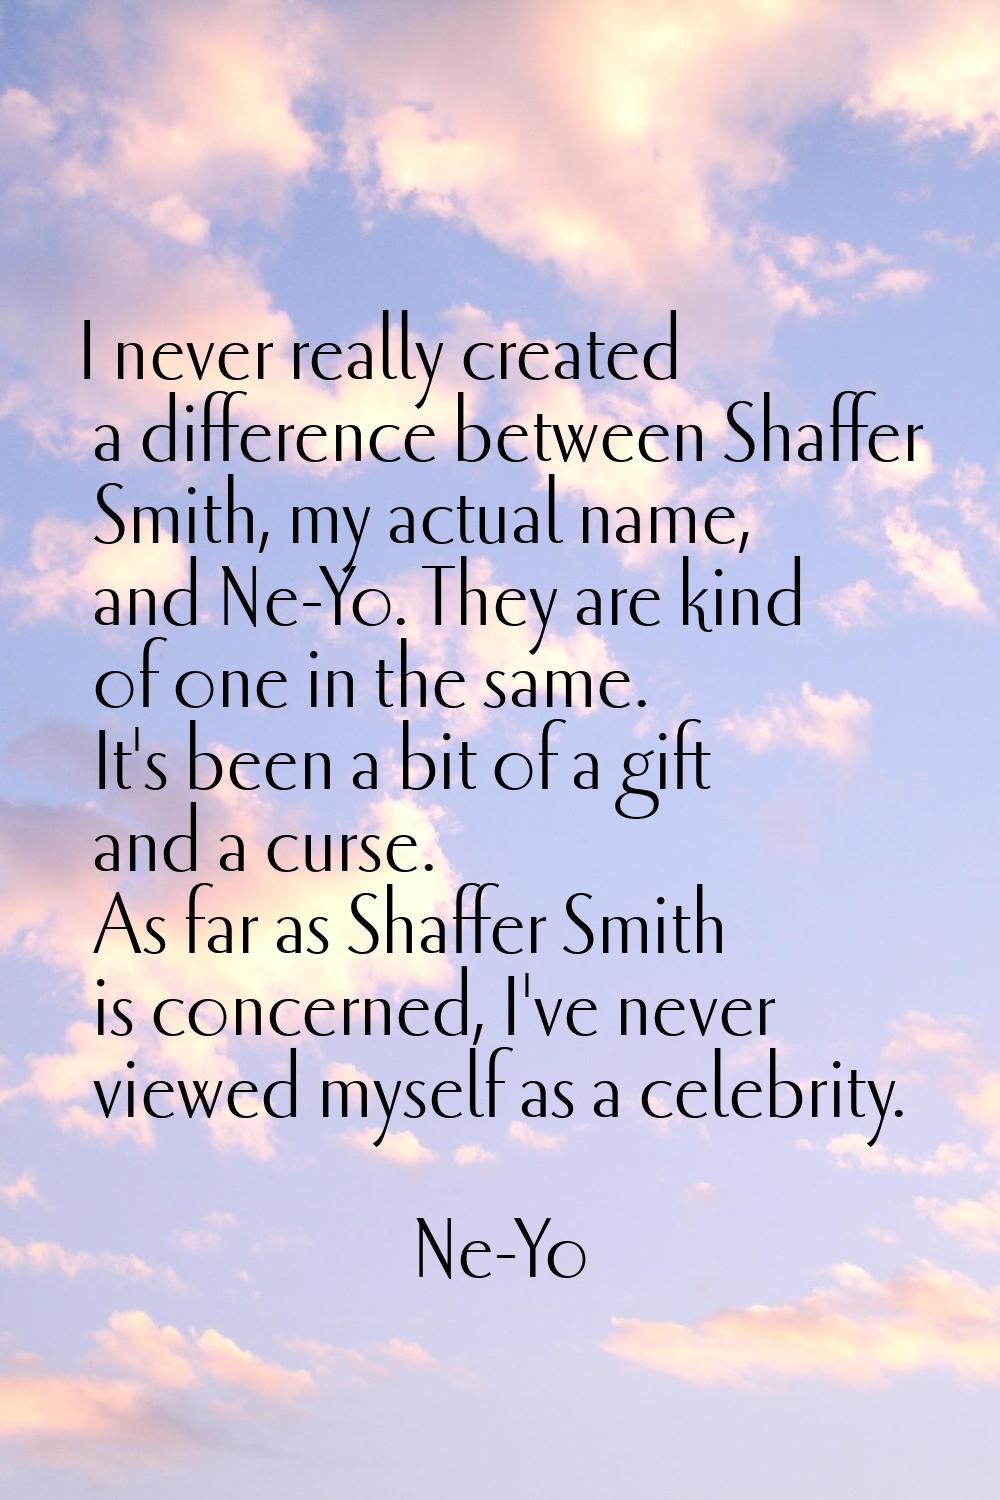 I never really created a difference between Shaffer Smith, my actual name, and Ne-Yo. They are kind